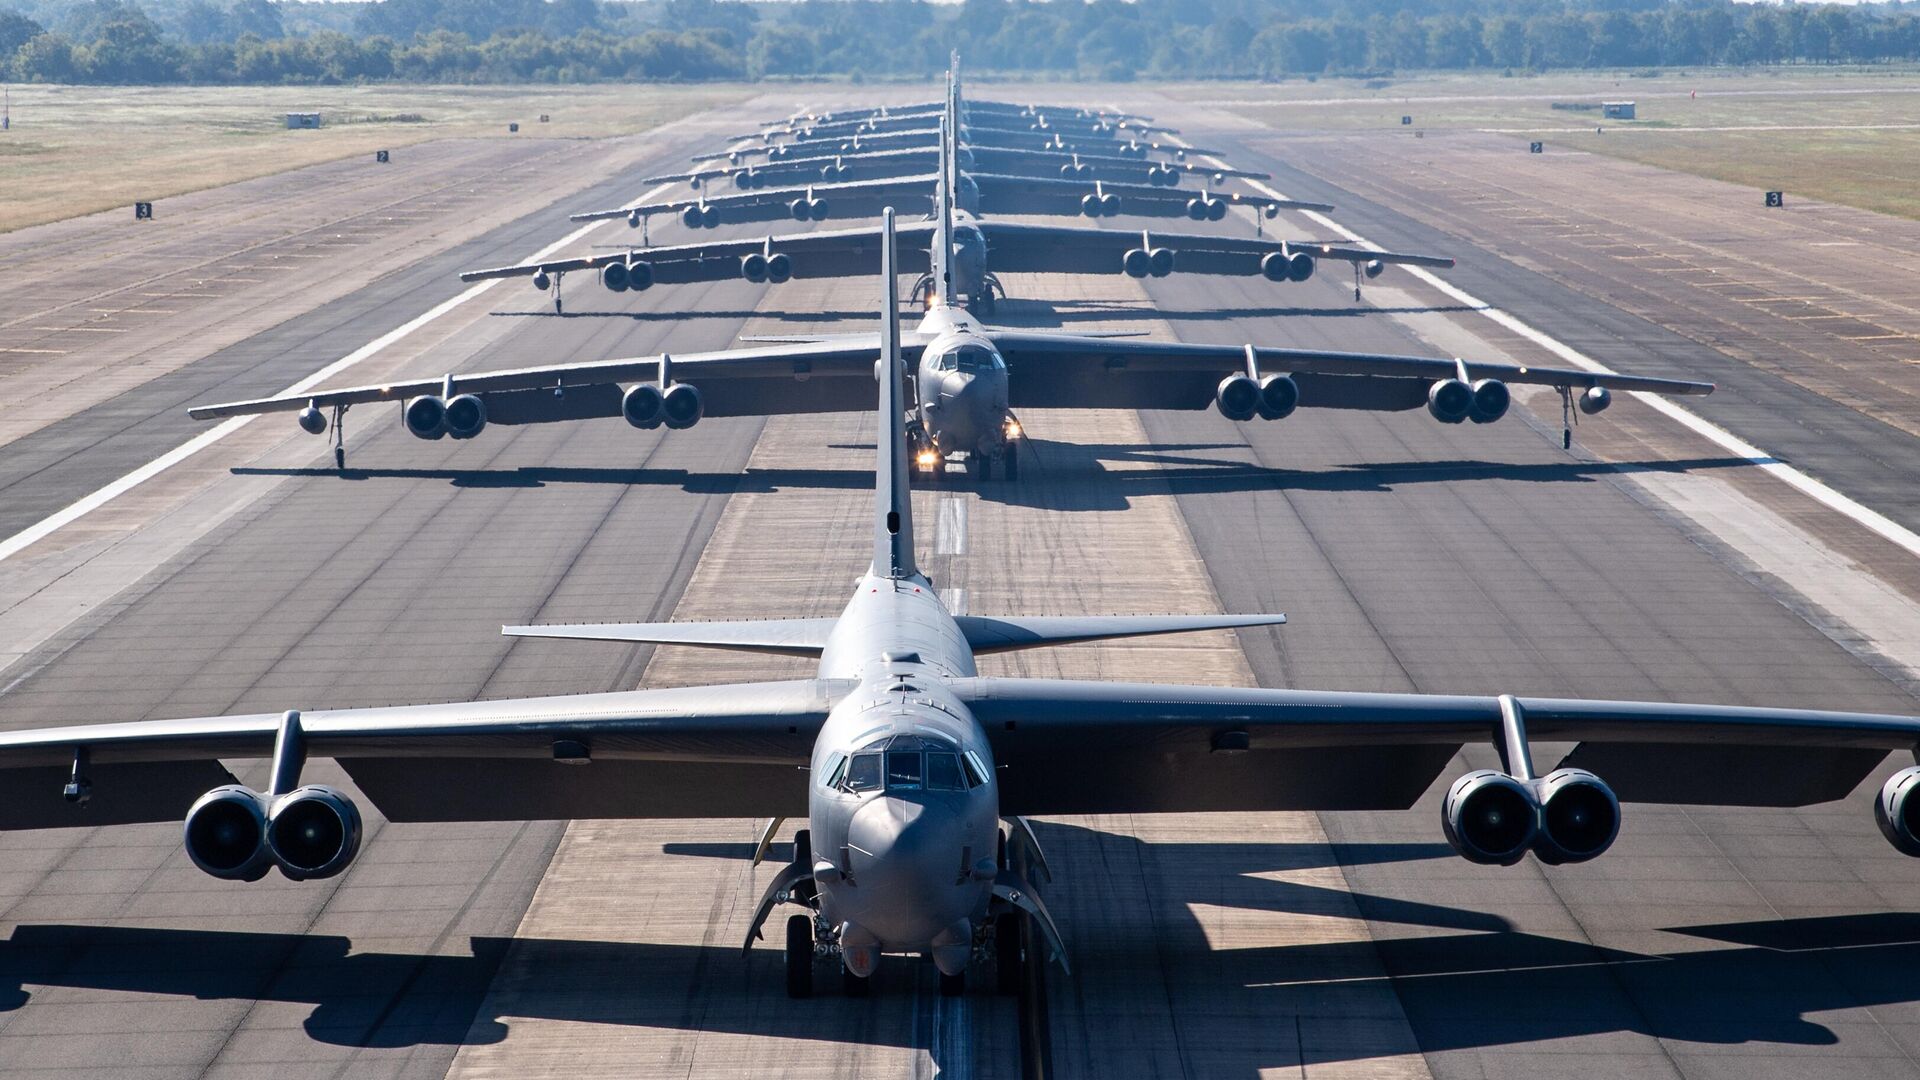 B-52H Stratofortresses from the 2nd Bomb Wing line up on the runway at Barksdale Air Force Base, La., Oct. 14, 2020. The B-52 is a long-range, heavy bomber that can perform a variety of missions and has been the backbone of U.S. strategic bomber forces for more than 60 years. - Sputnik International, 1920, 28.01.2023